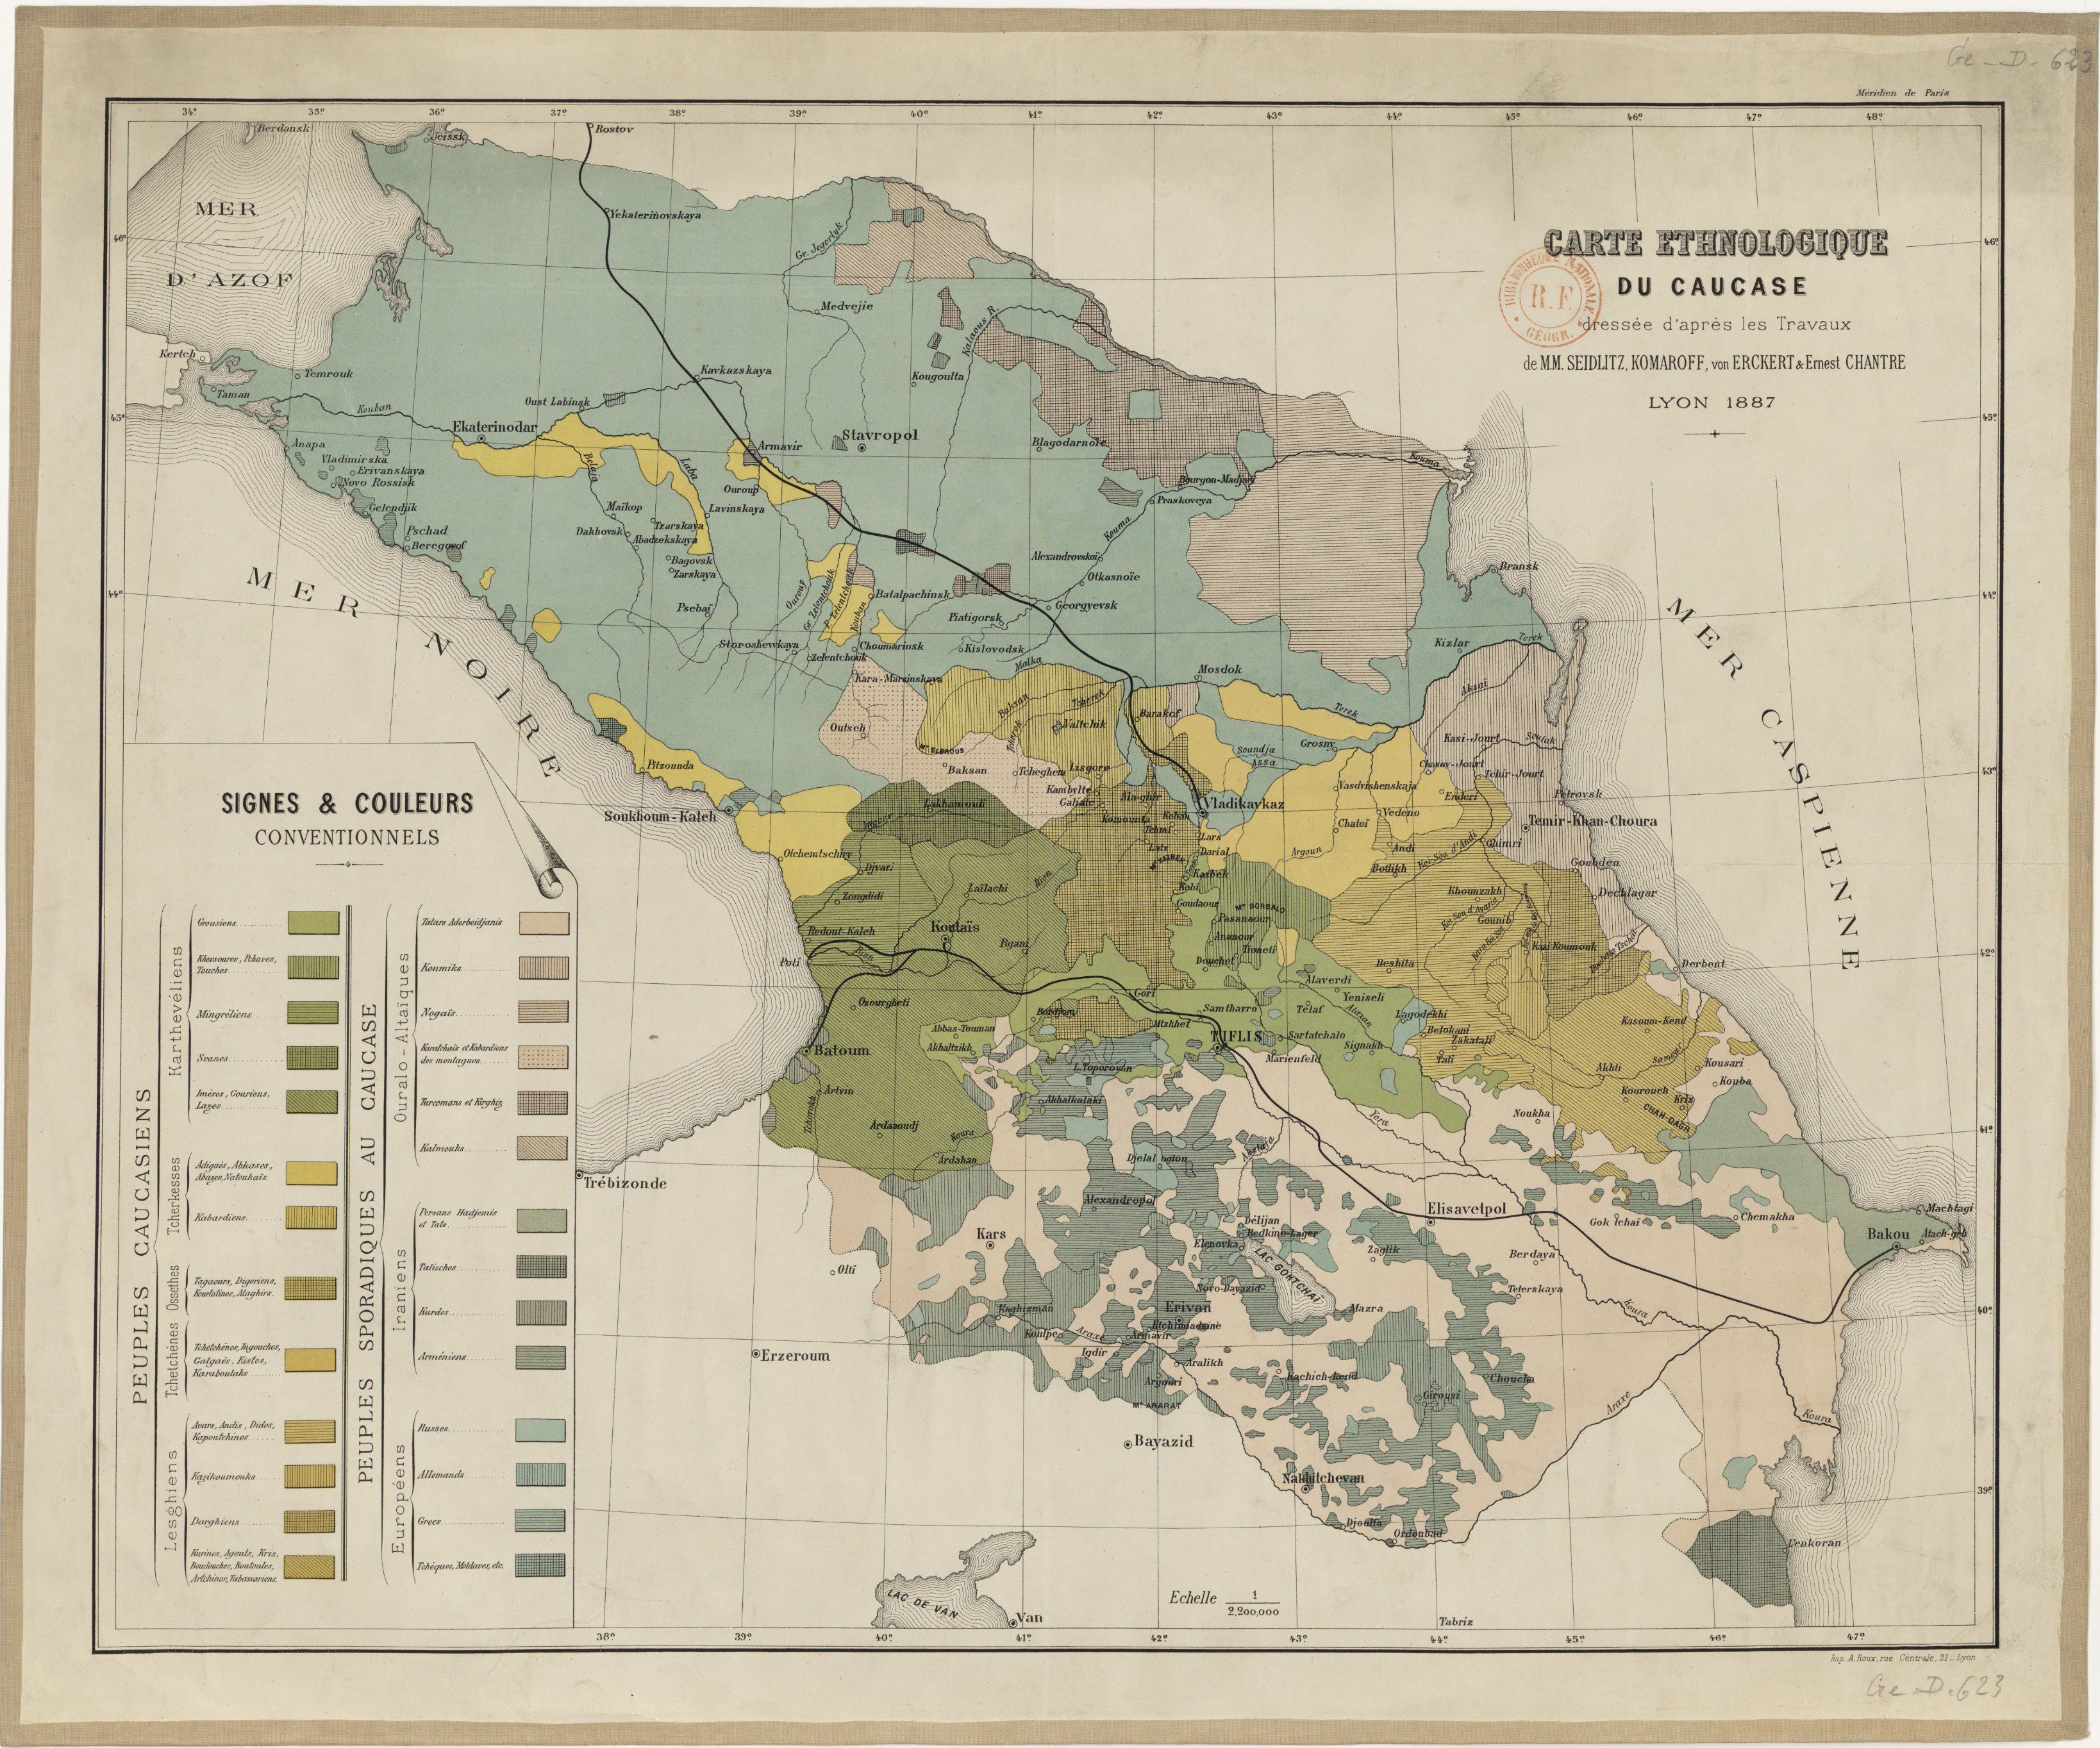 The ethnographic map of the Caucasus, based partly on the researches of Ernest Chantre (1887).